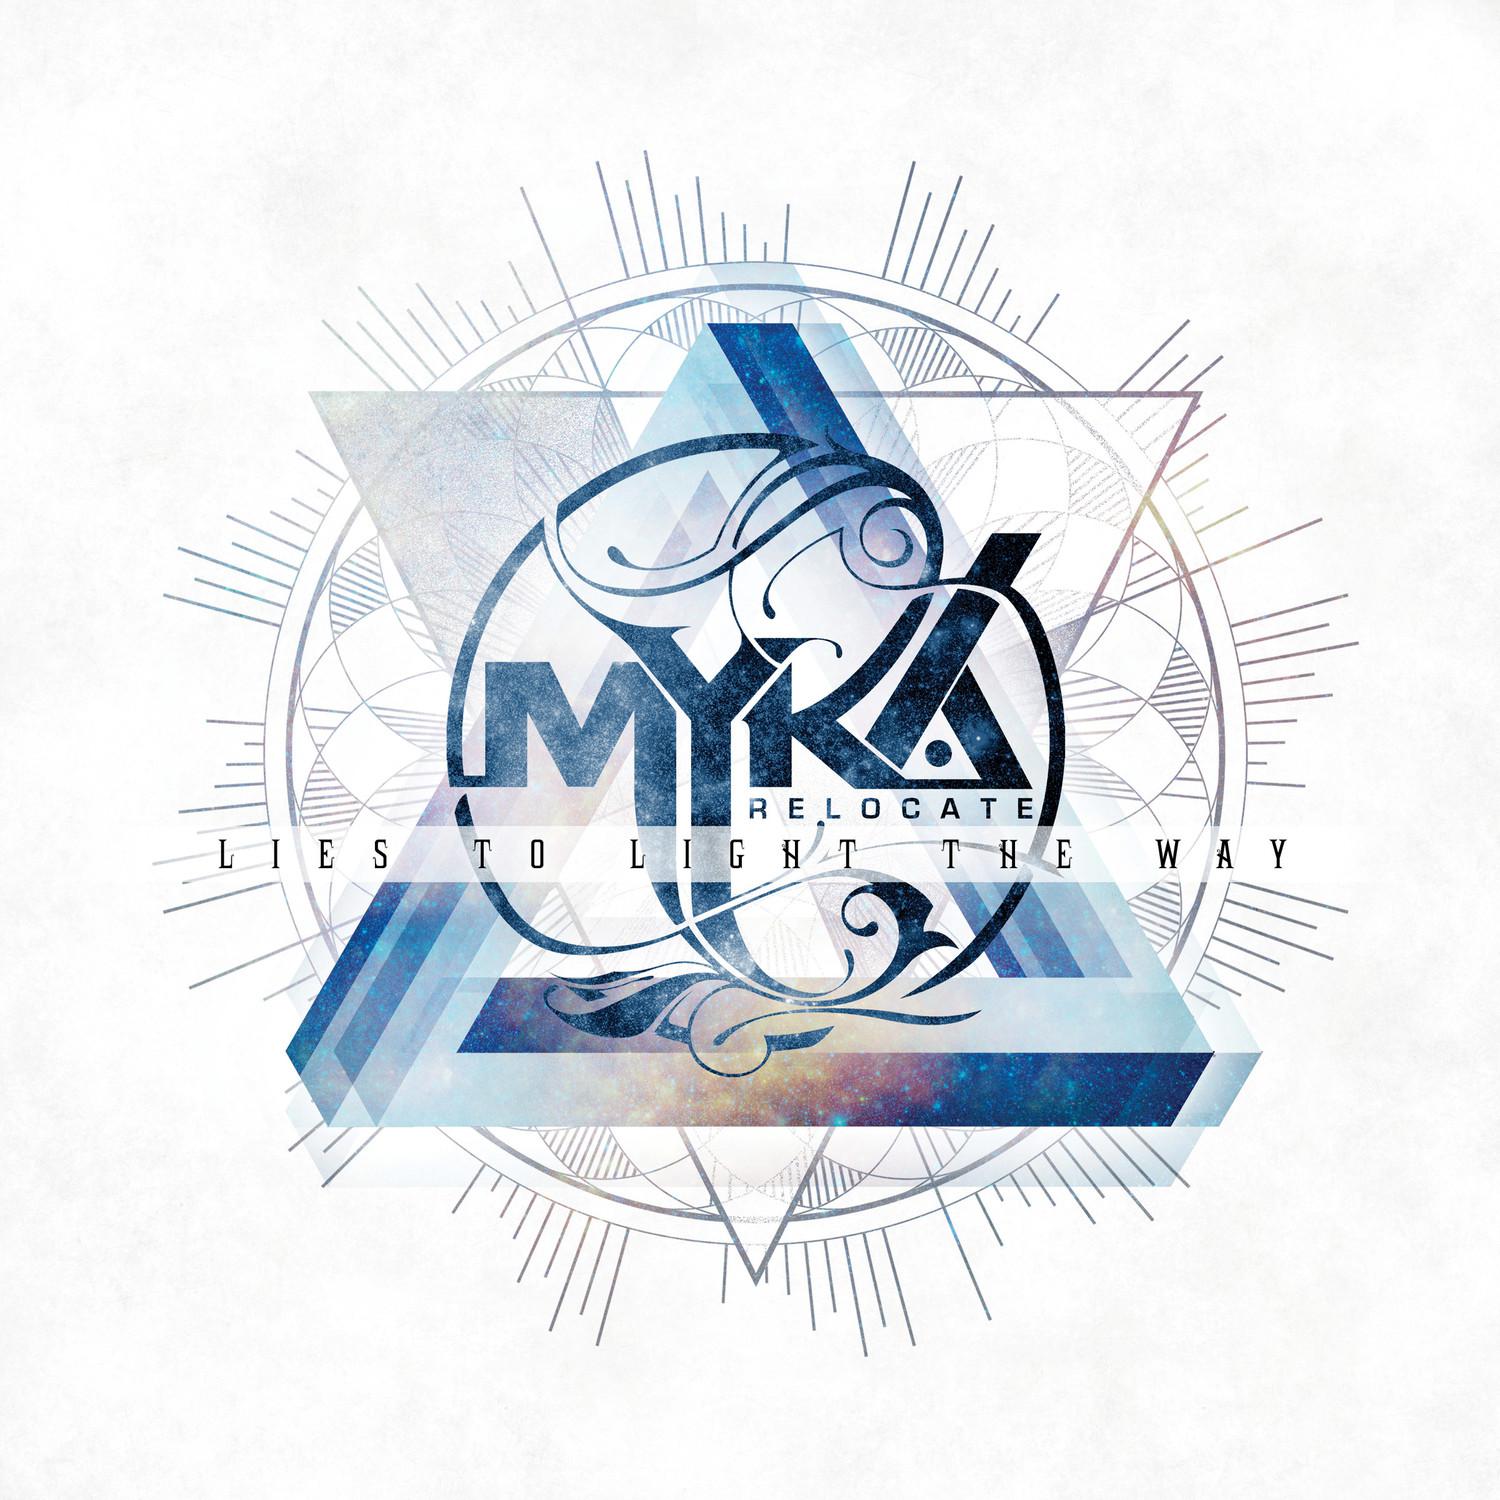 Myka, Relocate - Something to Dream About